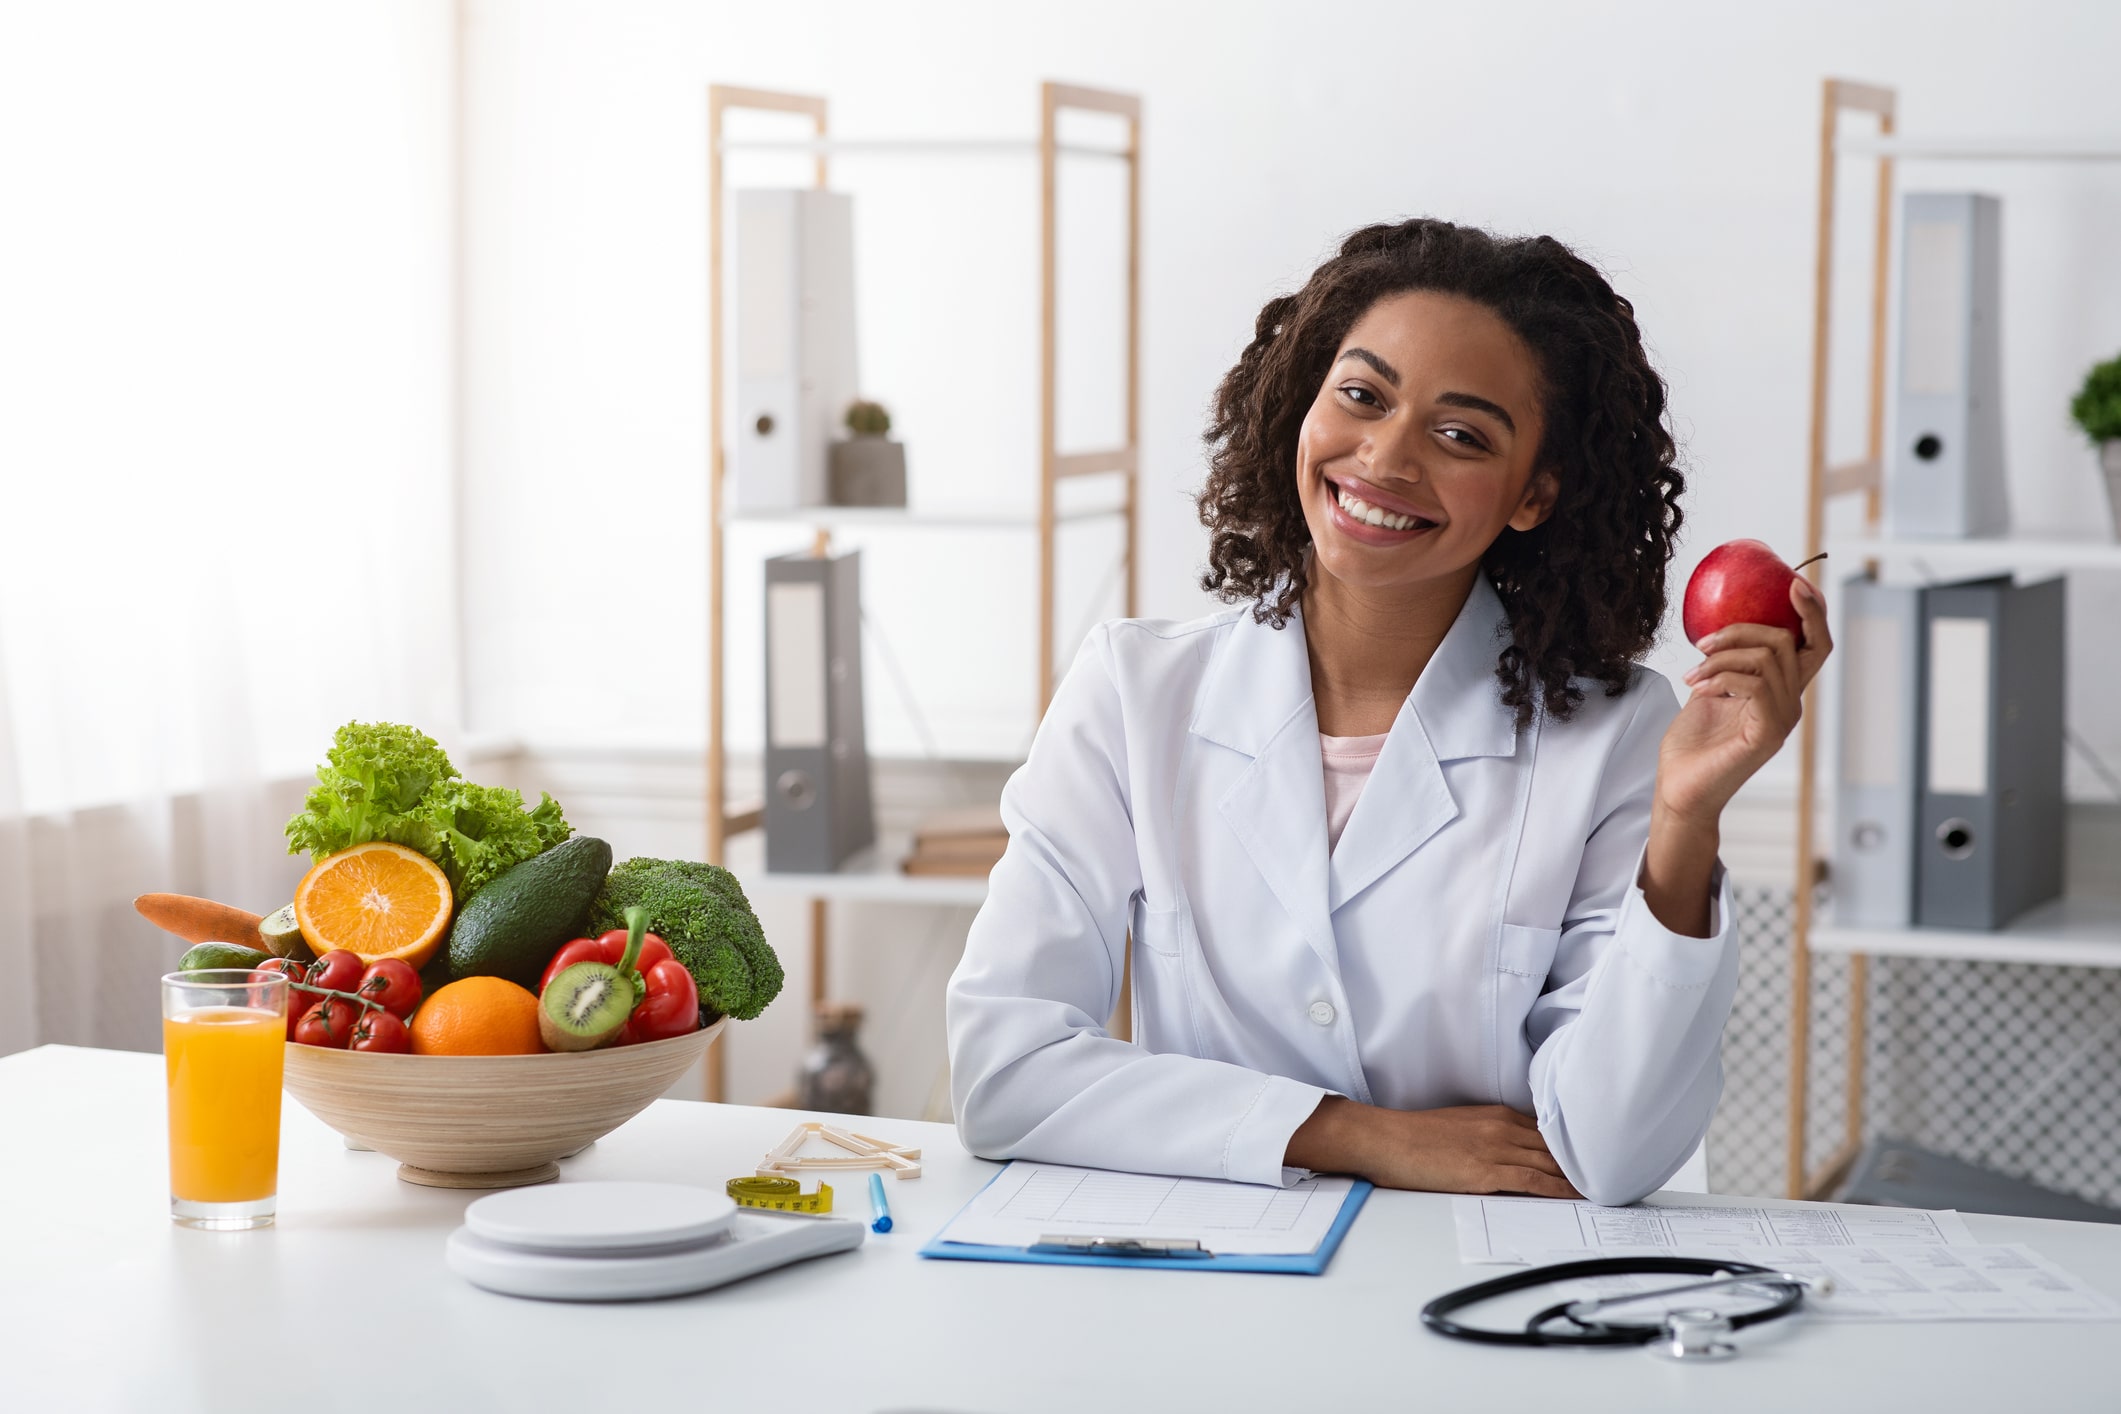 Nutrition professional sitting at a table and holding an apple.